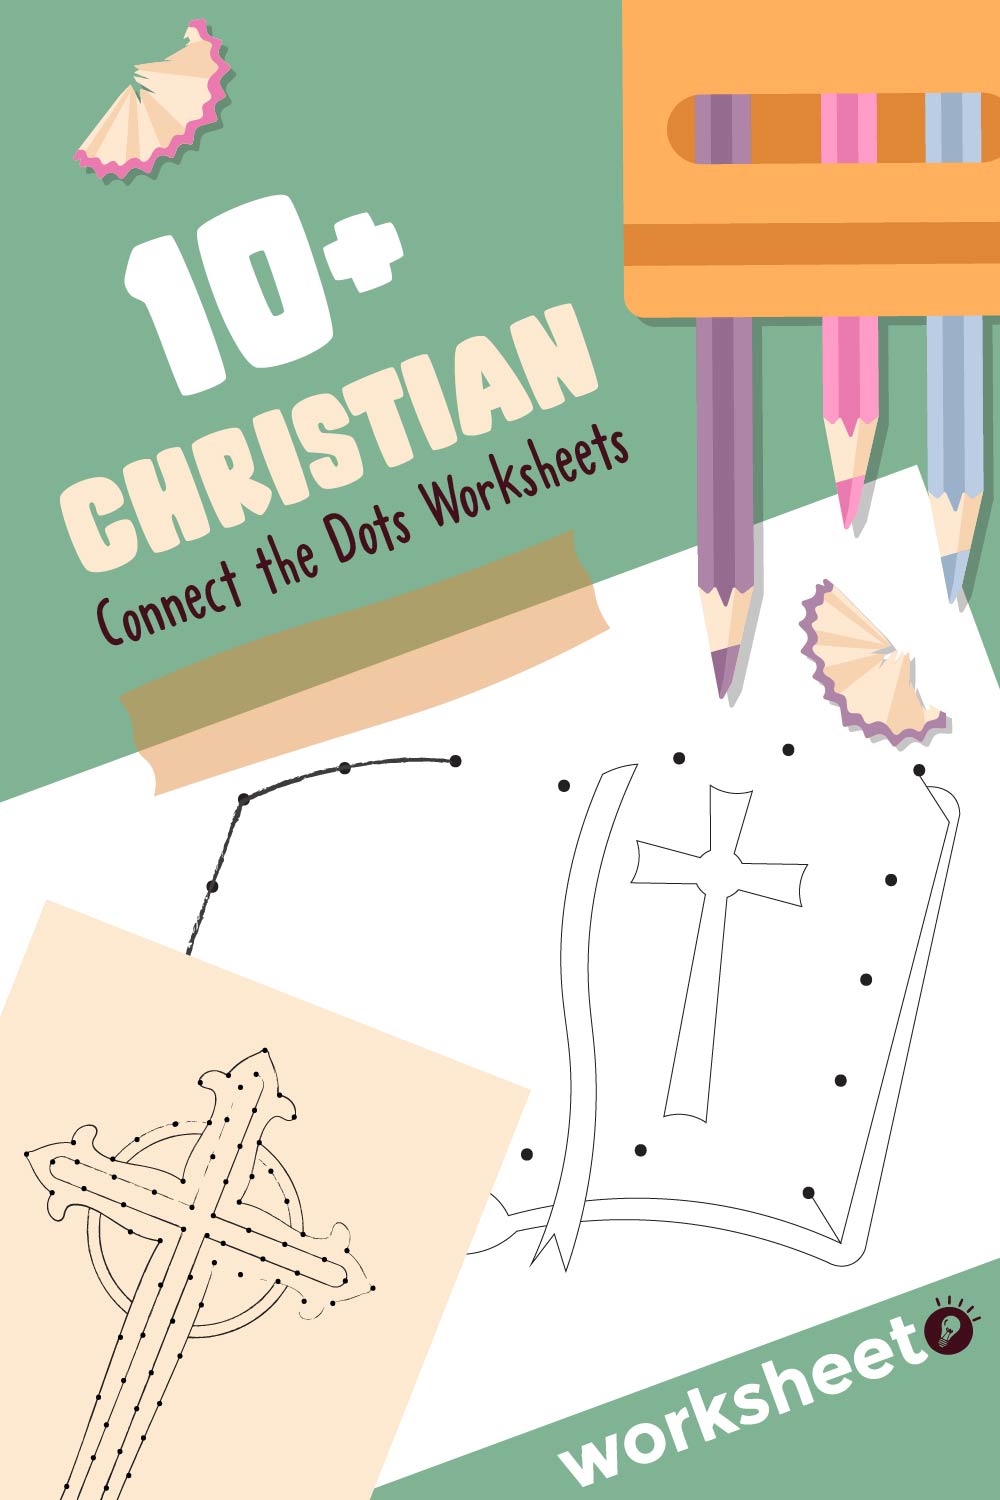 Christian Connect the Dots Worksheets